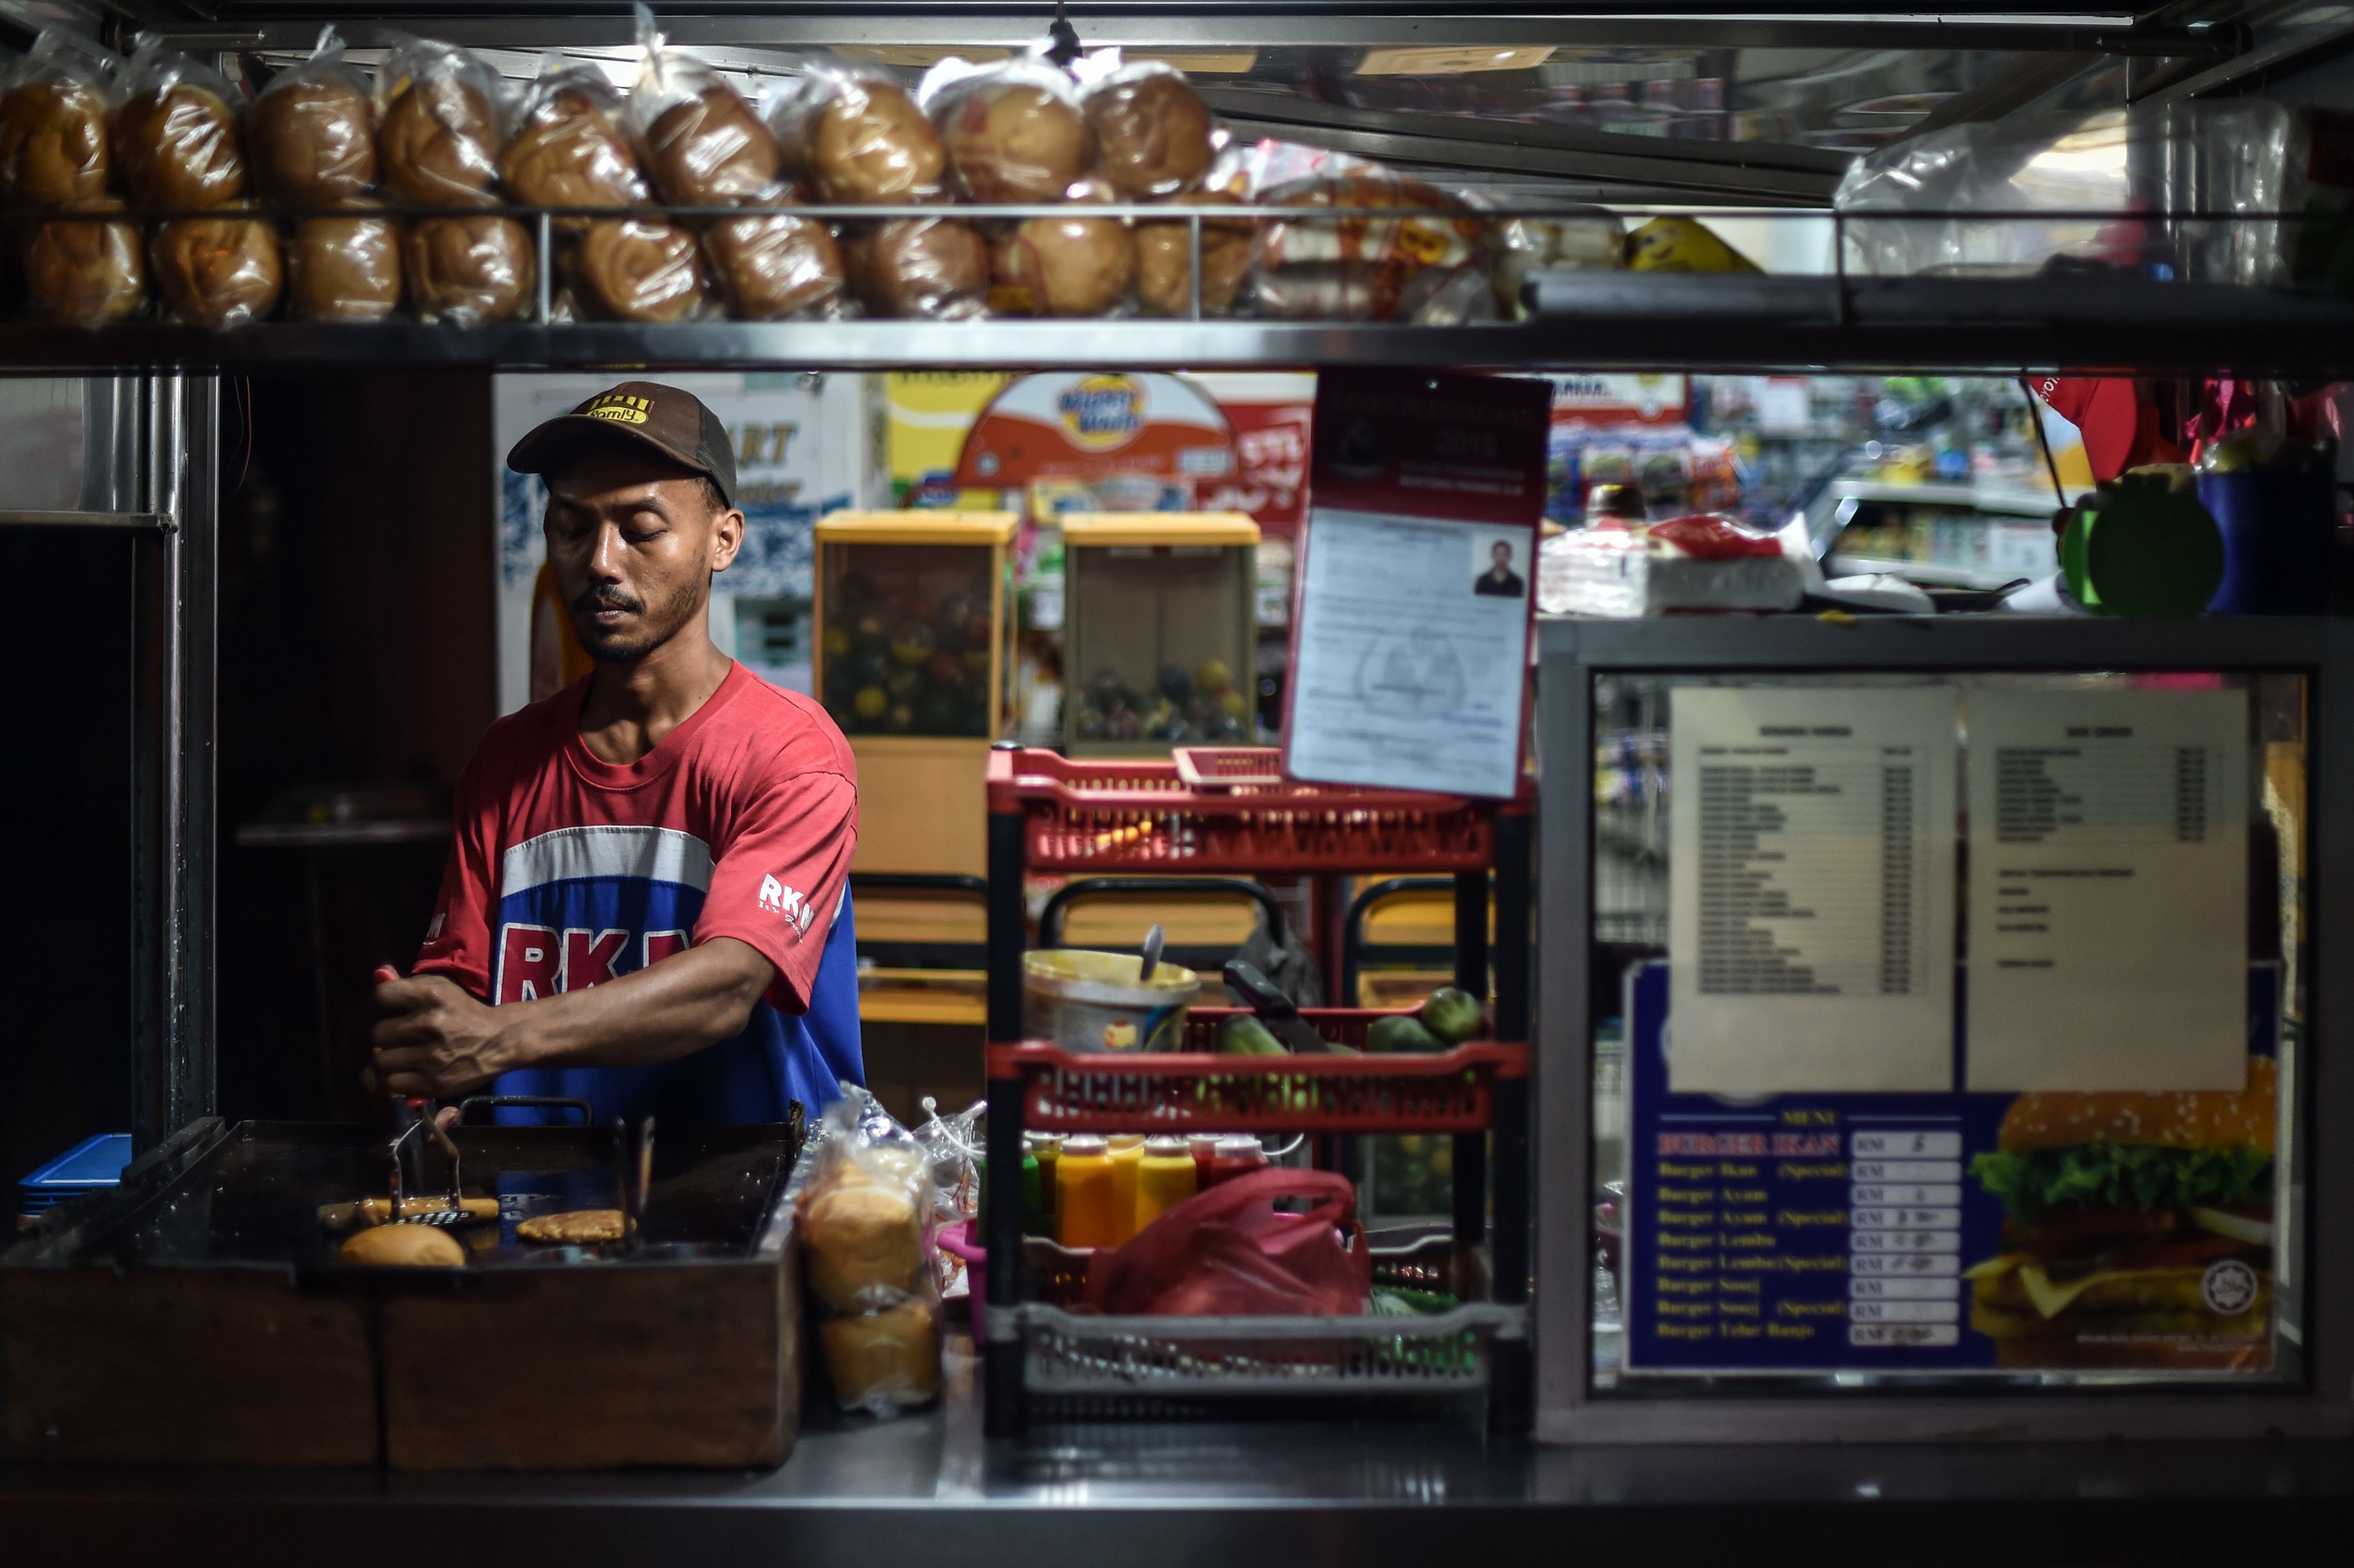 An employee cooks burgers and hotdogs at a roadside stall in Karak, outside Kuala Lumpur, on Oct. 18, 2016 (Mohd Rasfan—AFP/Getty Images)